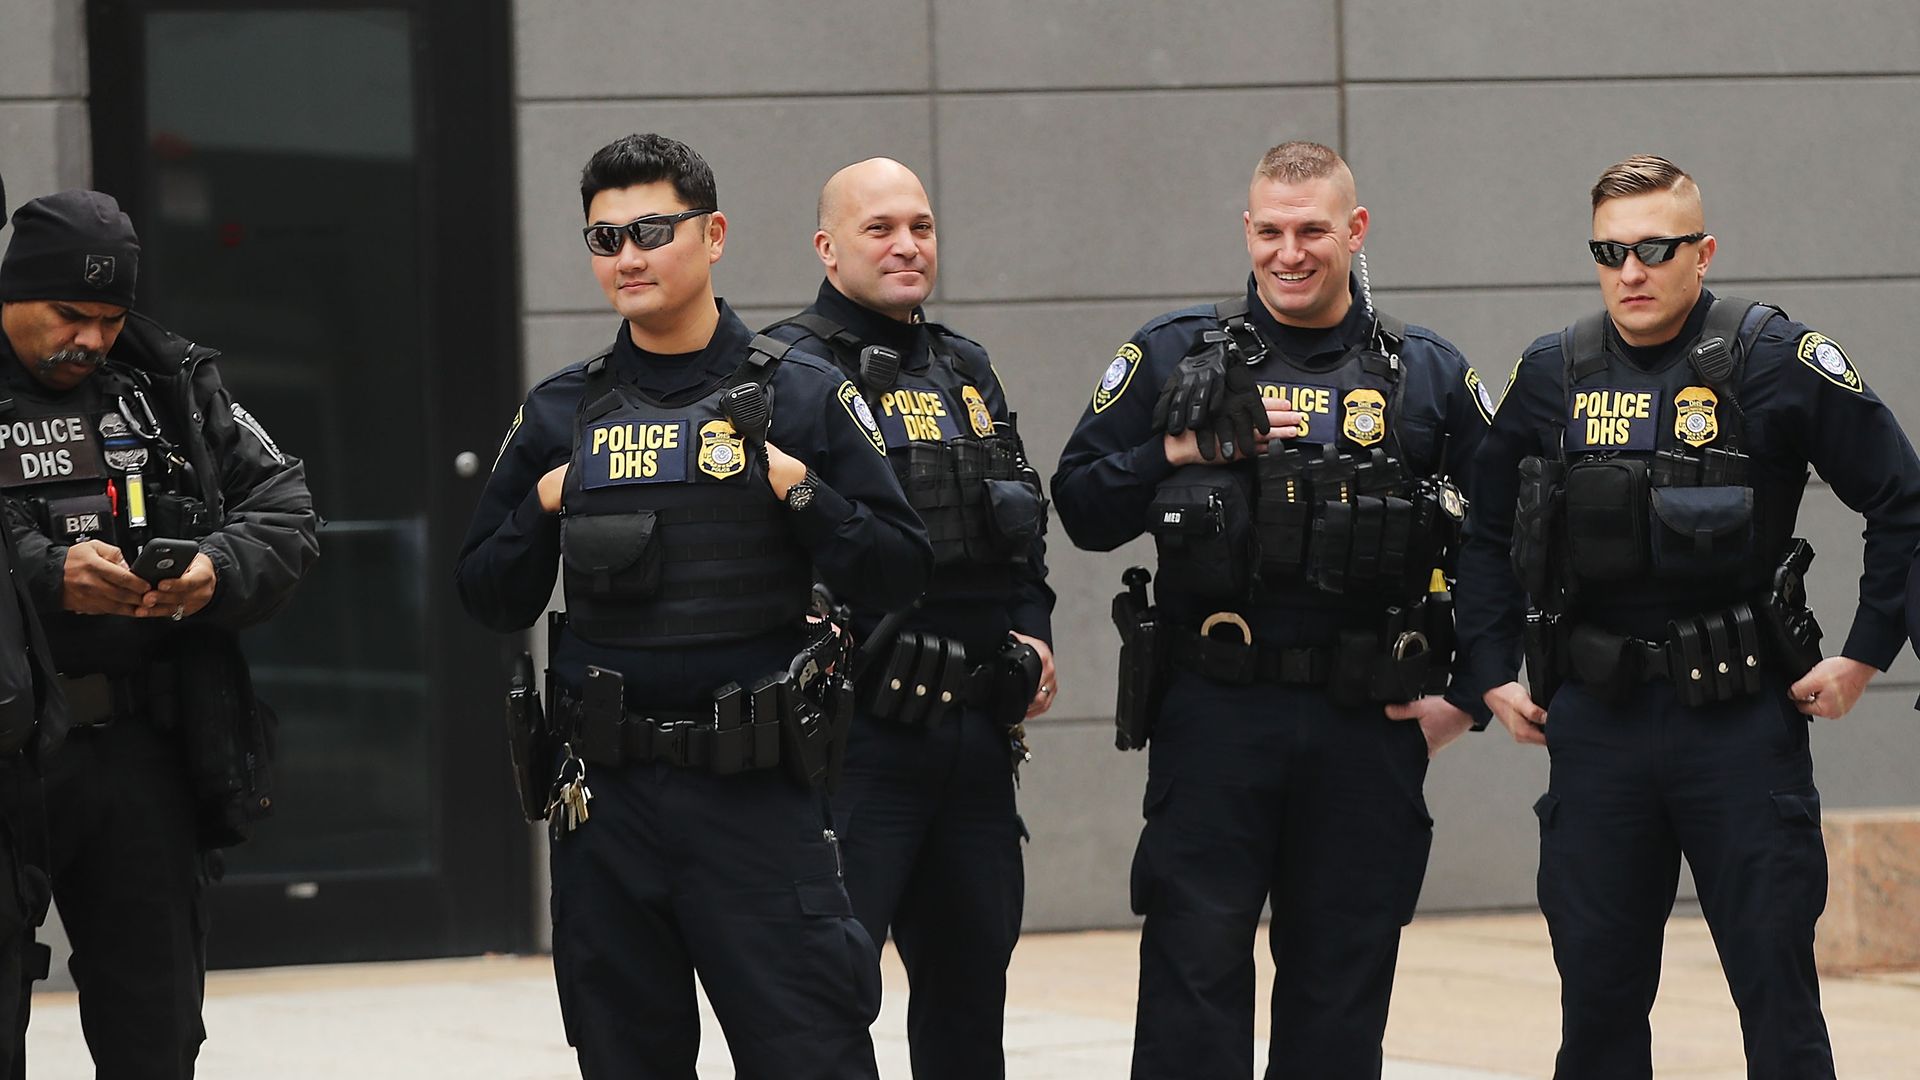 DHS police officers standing in a row